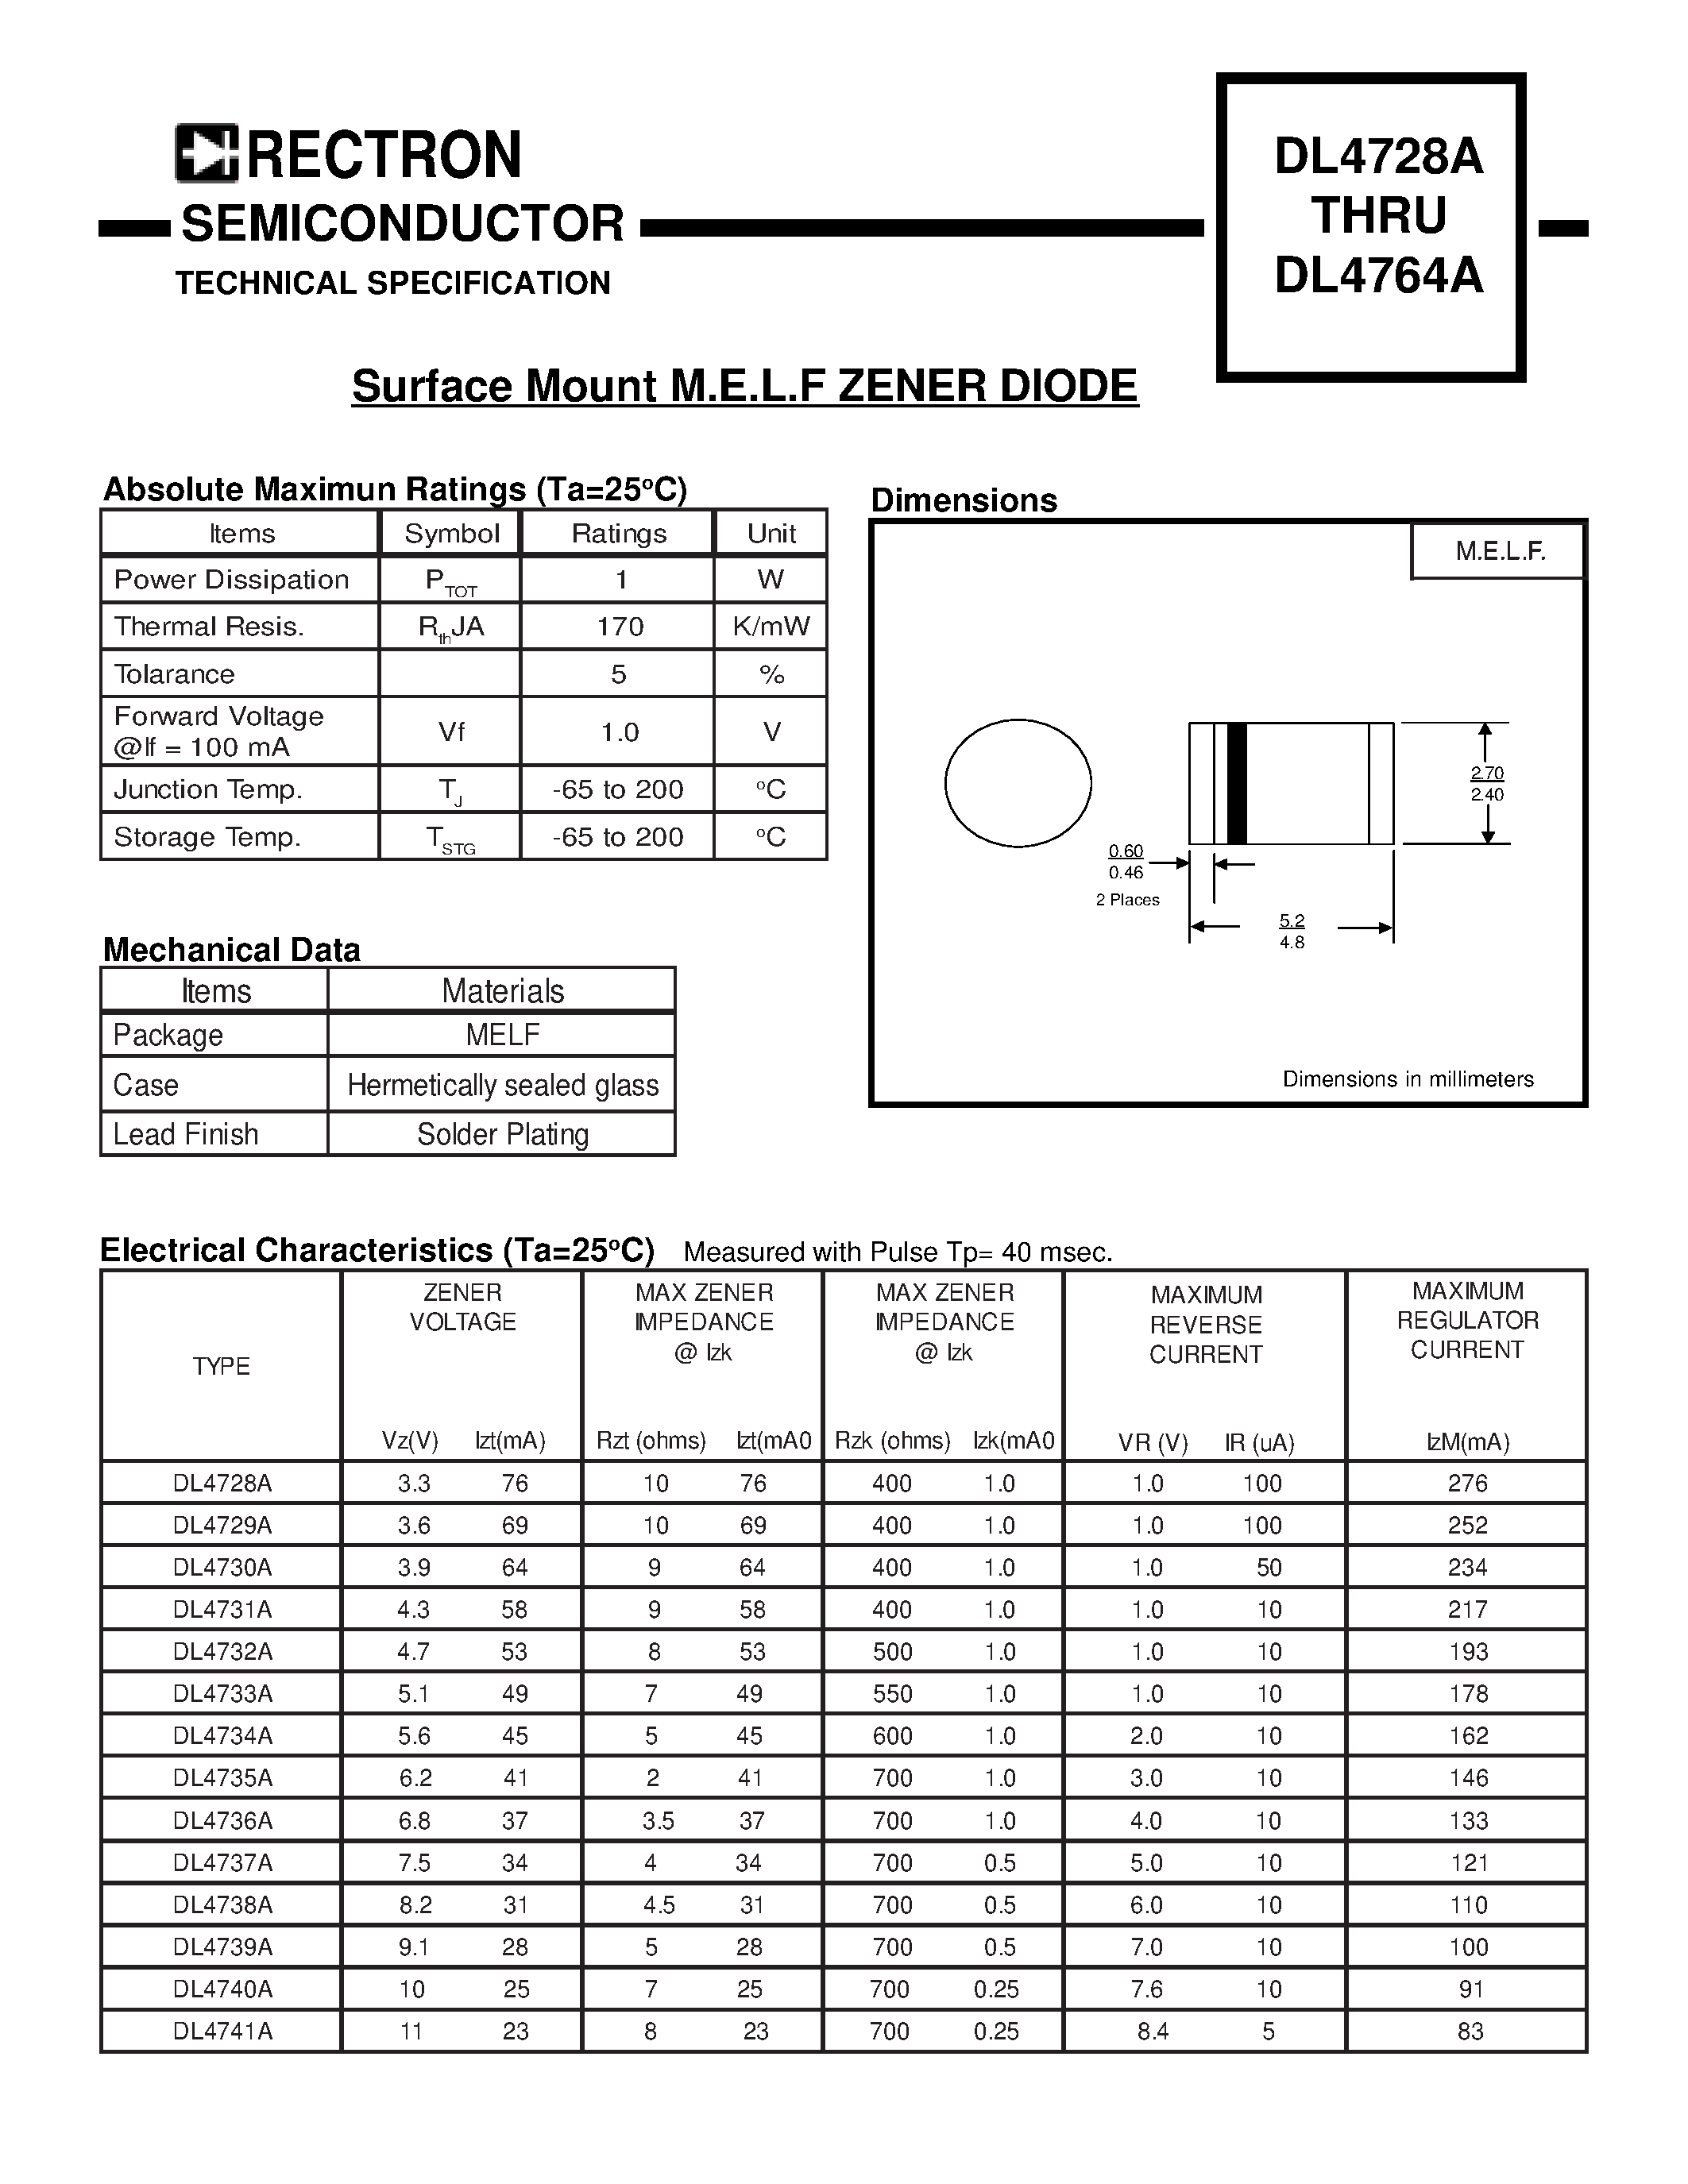 Datasheet DL4736A - Surface Mount M.E.L.F ZENER DIODE page 1